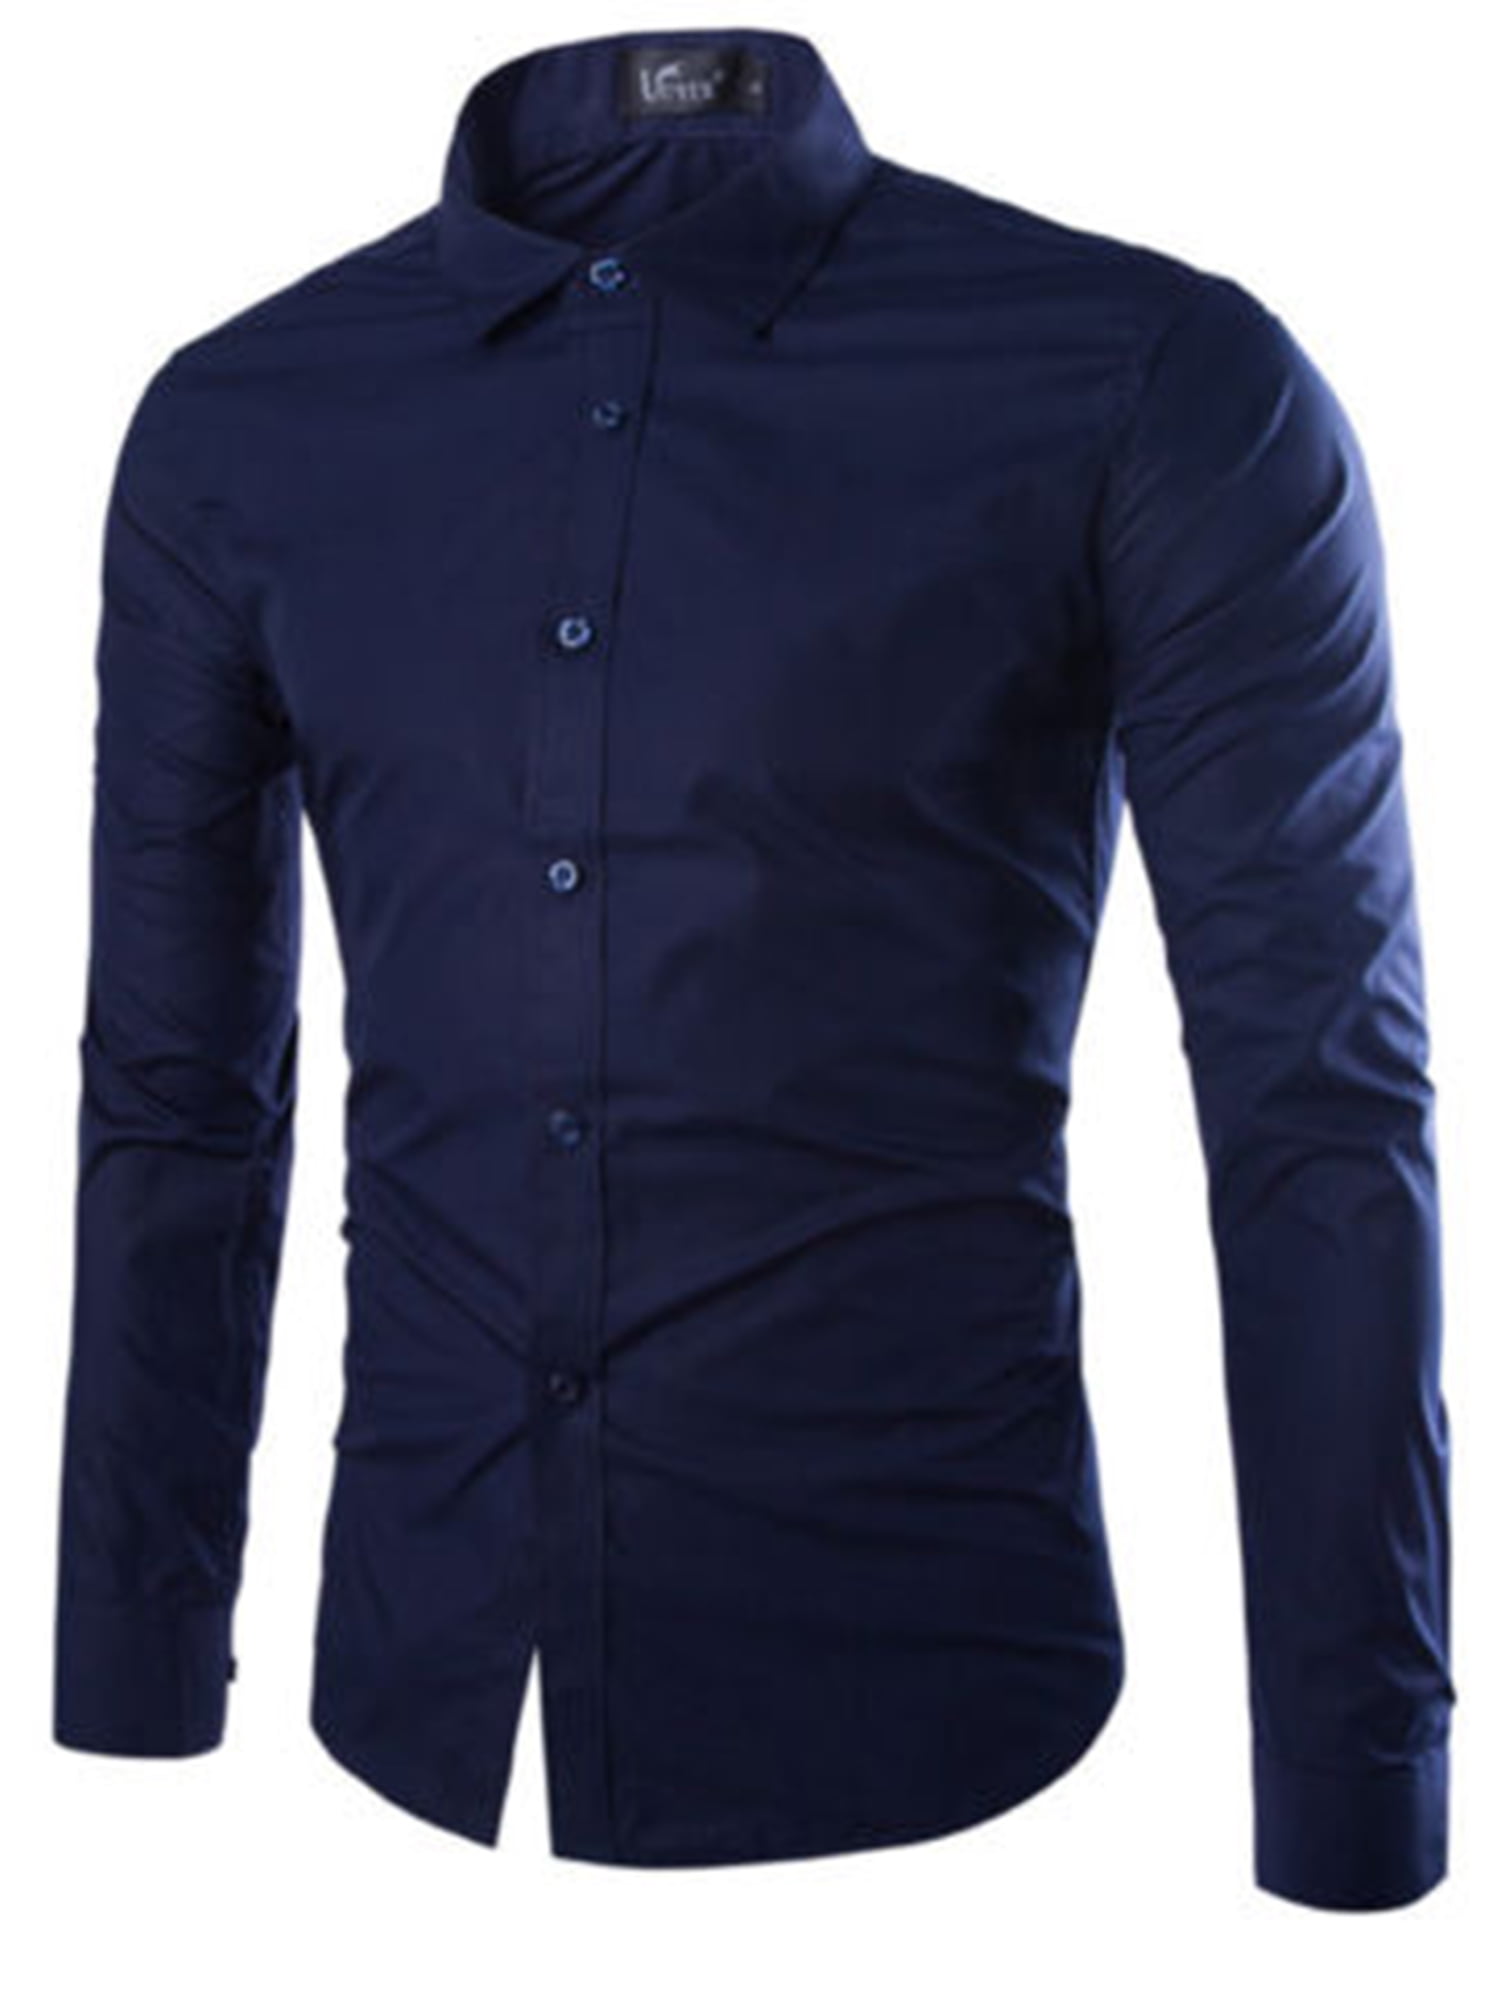 xkwyshop Men's Long Sleeve Button Up Shirts Solid Slim Fit Casual Business  Formal Dress Shirt Navy blue M